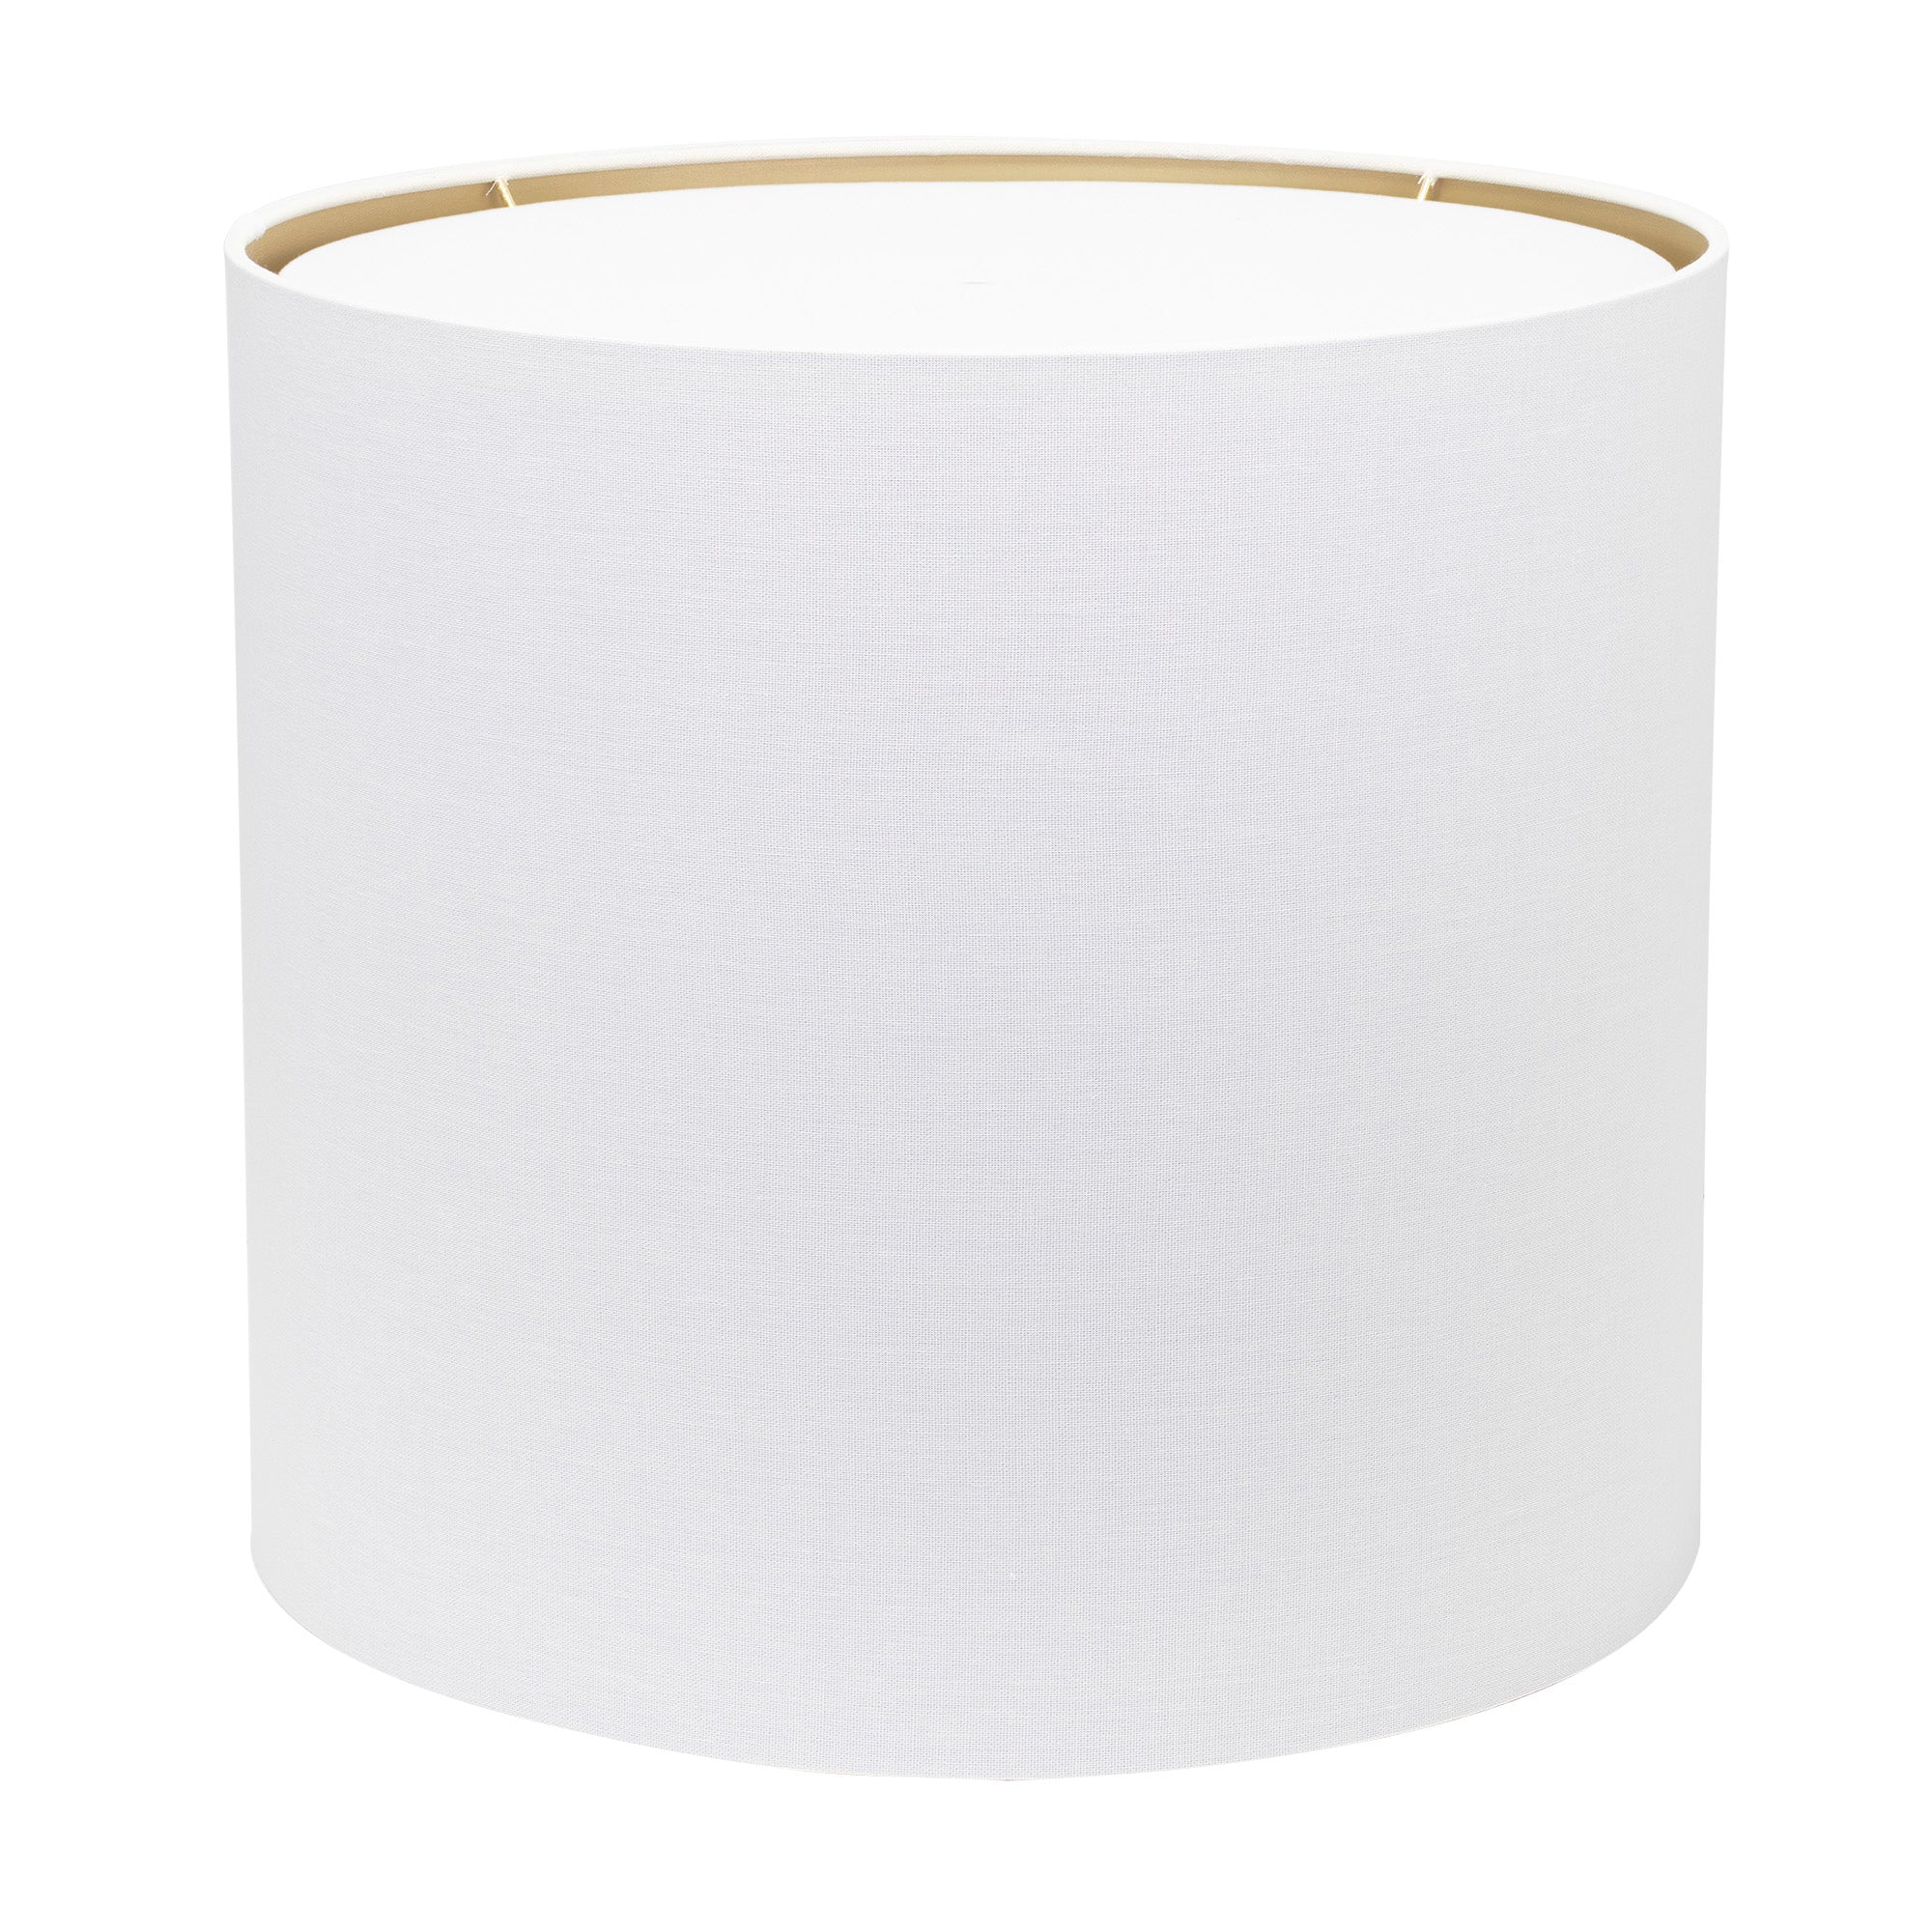 Round White Linen Drum Shade with Gold Lining 18" x 18" x 16" - Couture Lamps